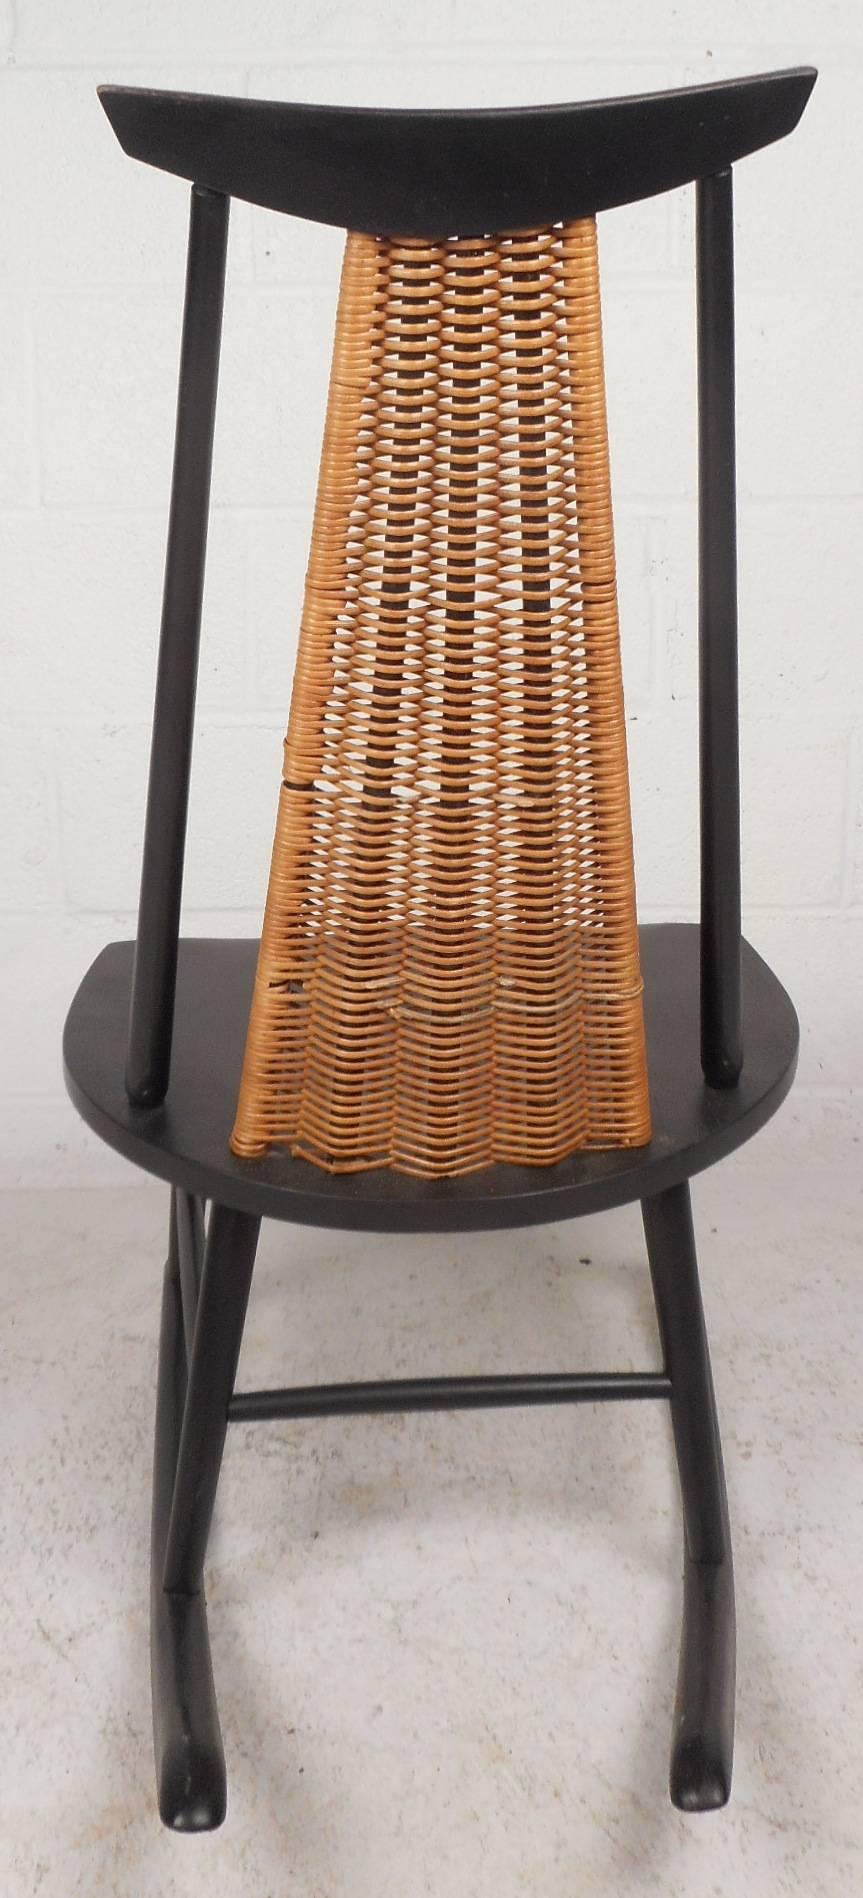 Wood Mid-Century Modern Danish Rocking Chair with a Woven Back Rest